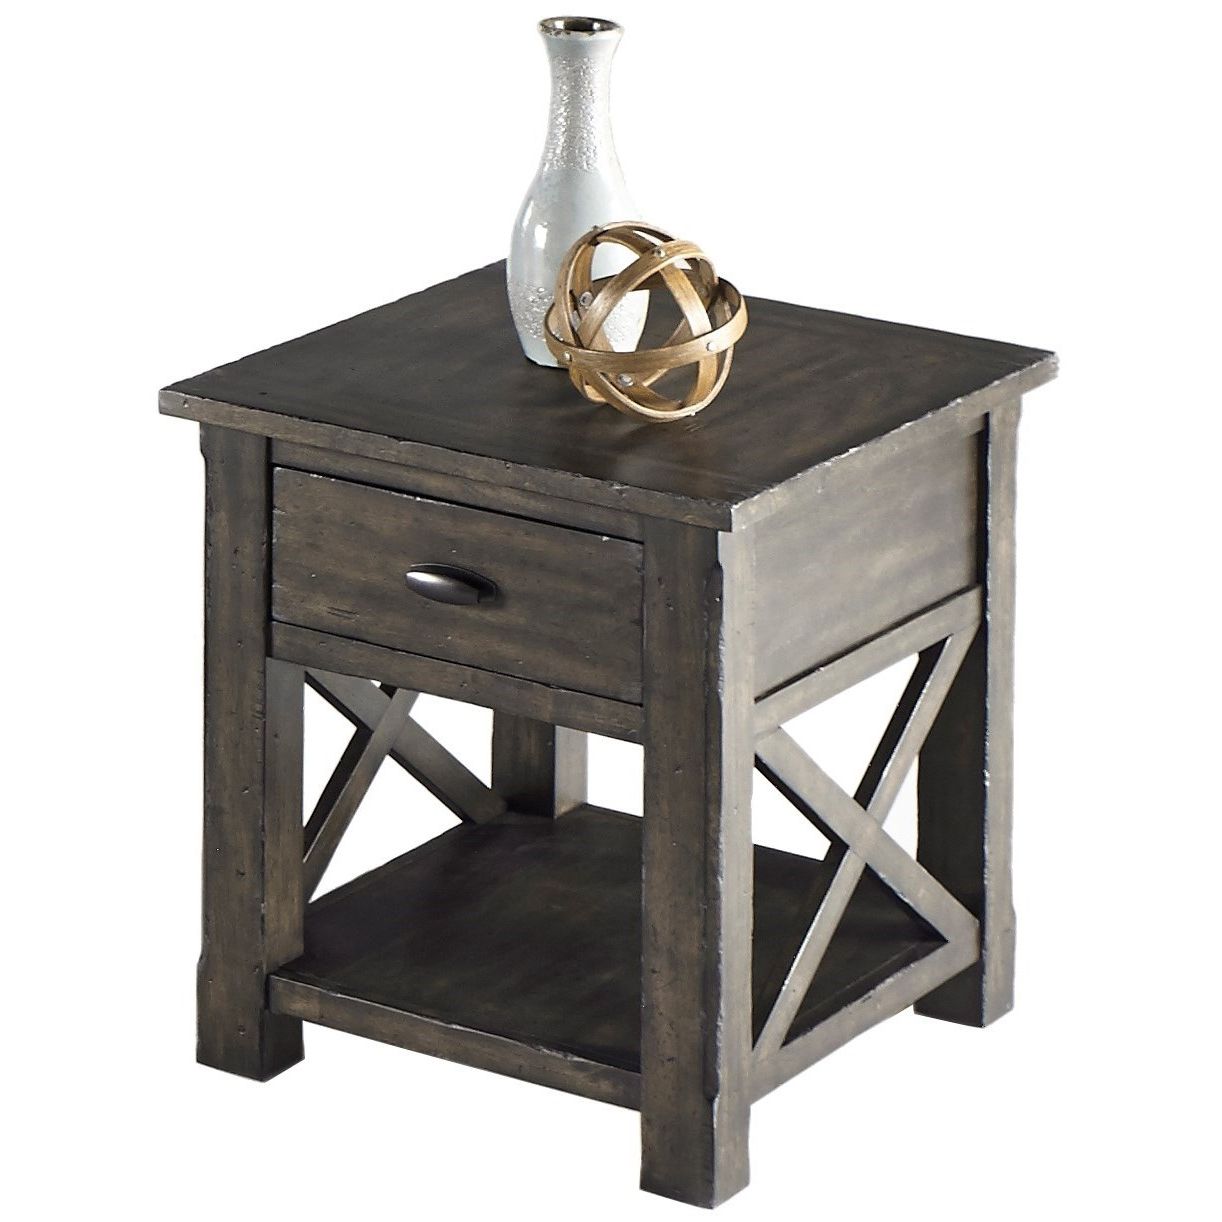 Progressive Furniture Crossroads Rustic Rectangular End Table In Gray Inside Rustic Gray End Tables (Gallery 7 of 20)